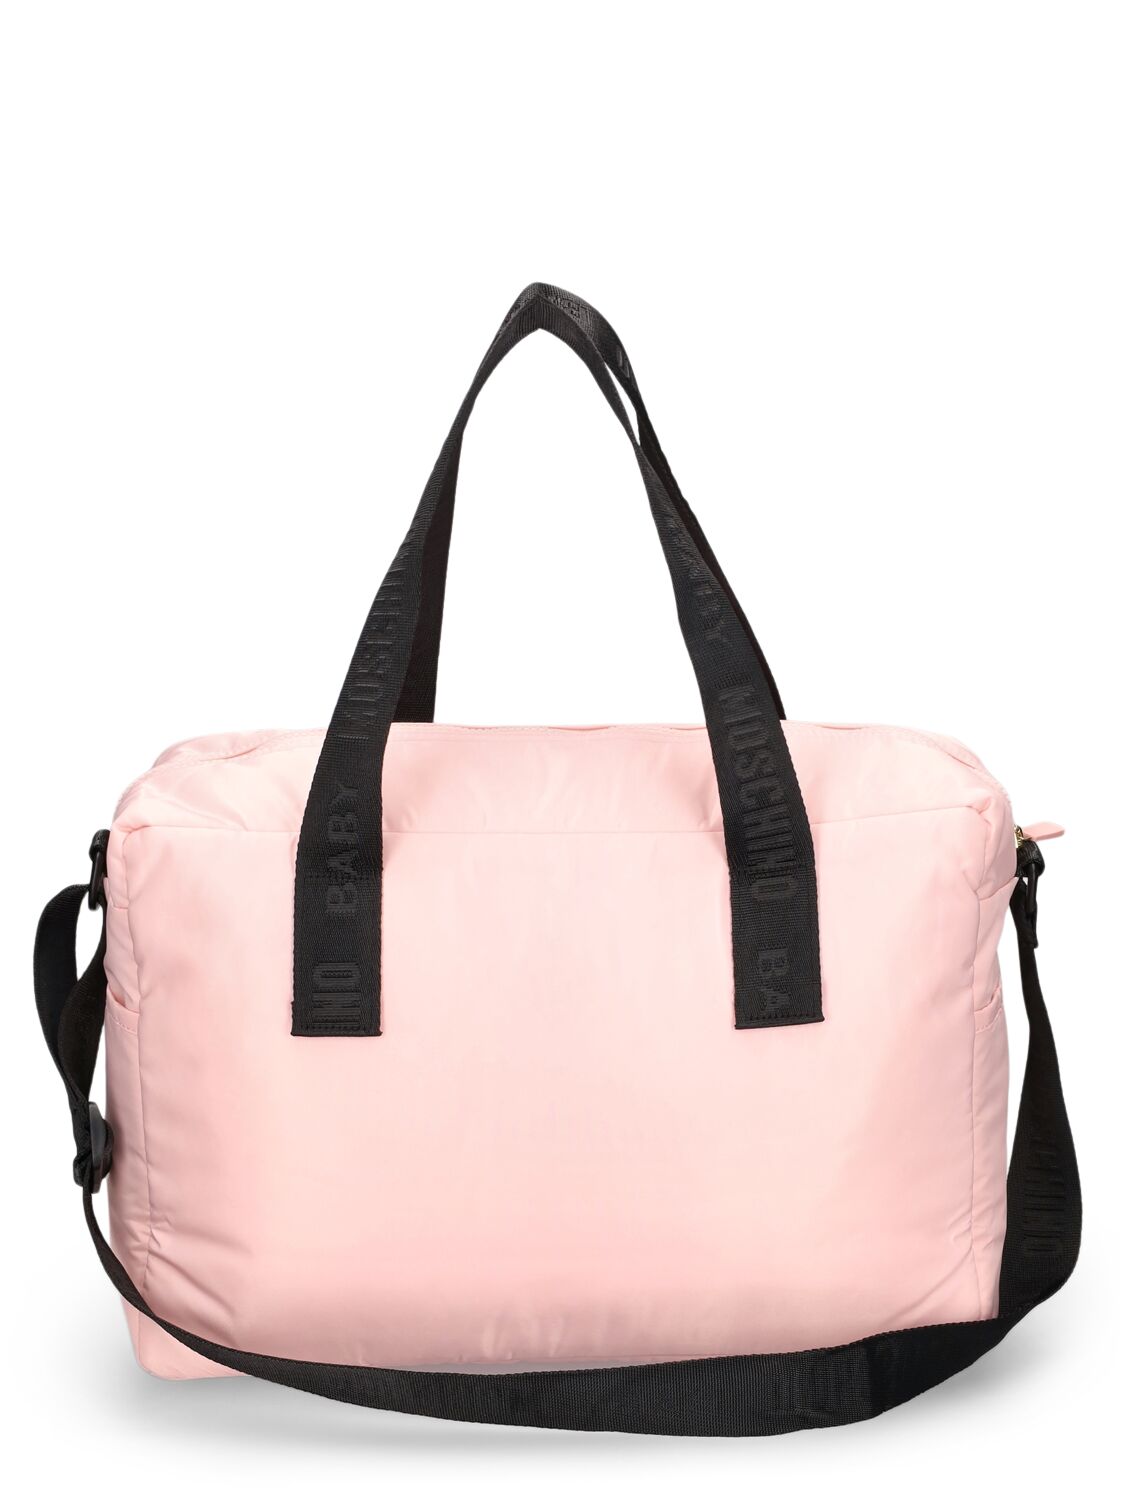 Shop Moschino Cotton Jersey Changing Bag & Mat In Pink